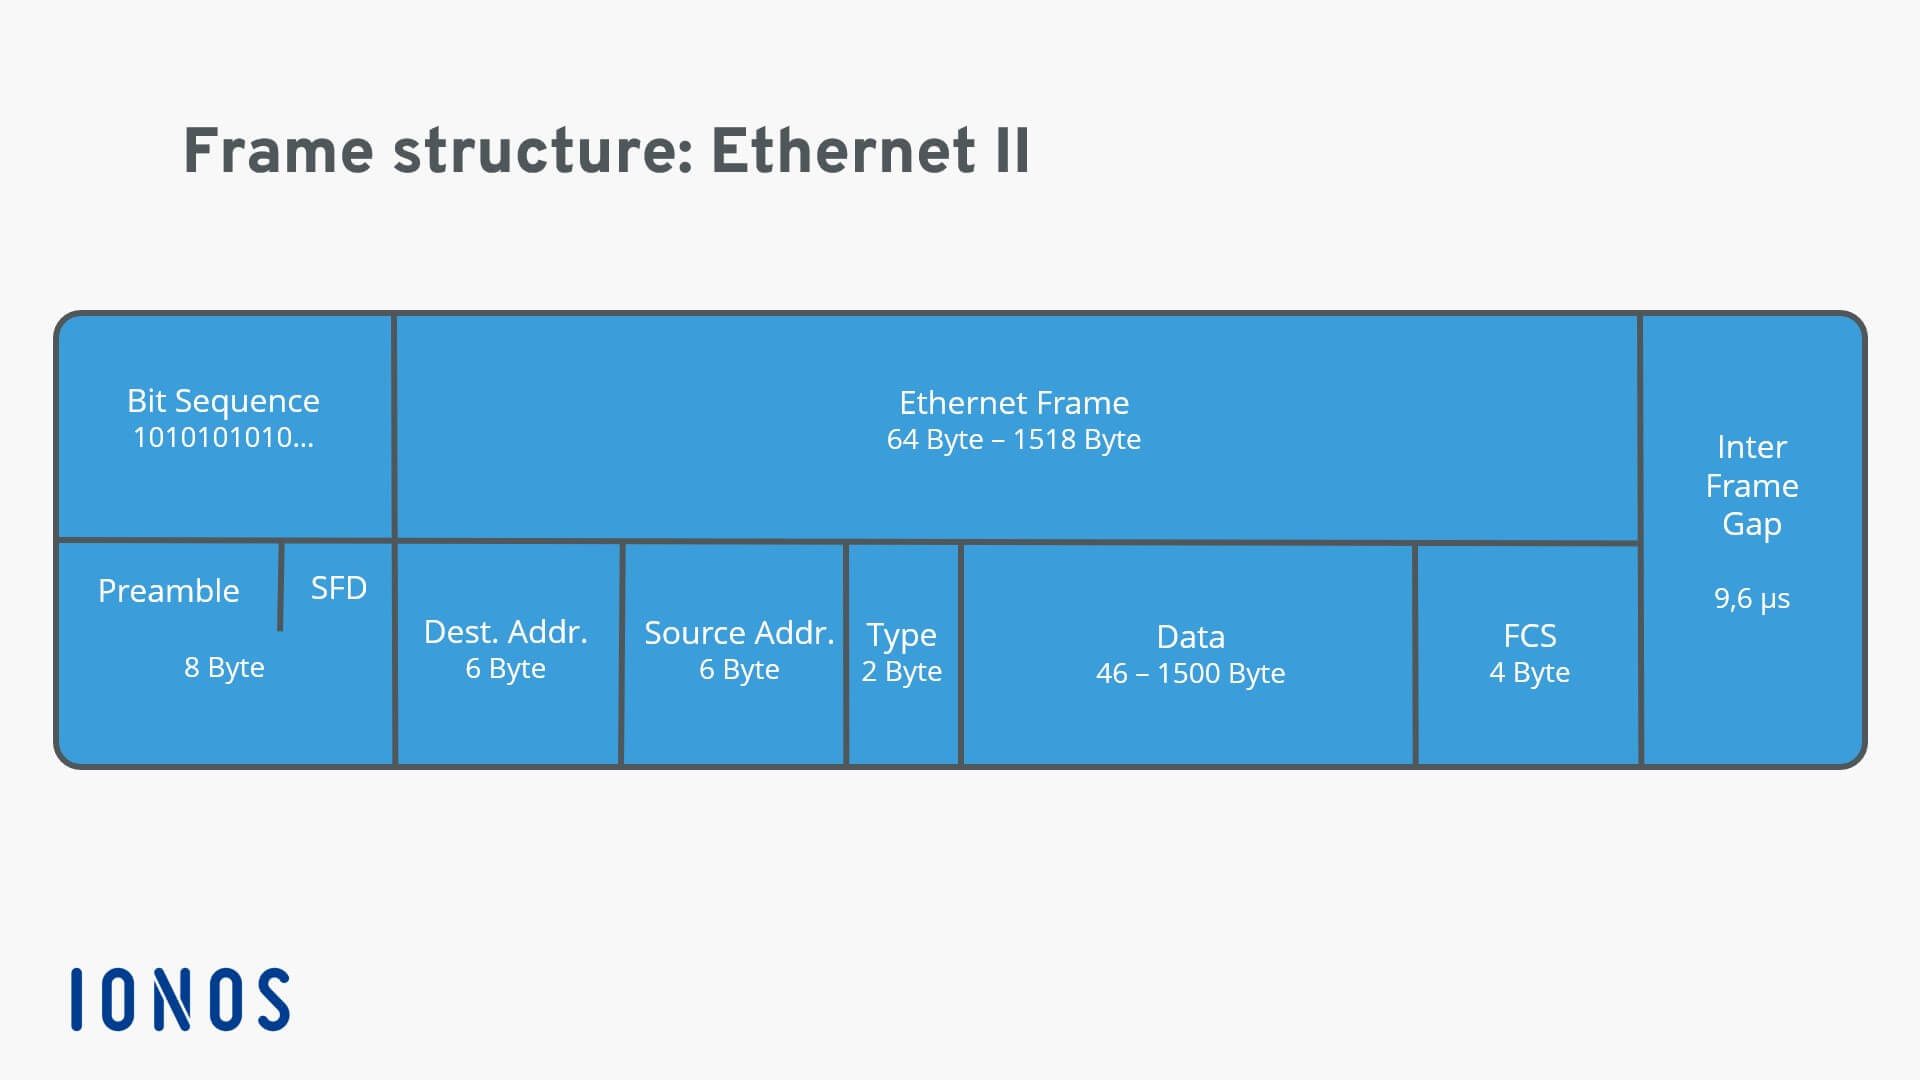 Representation of an Ethernet II frame structure